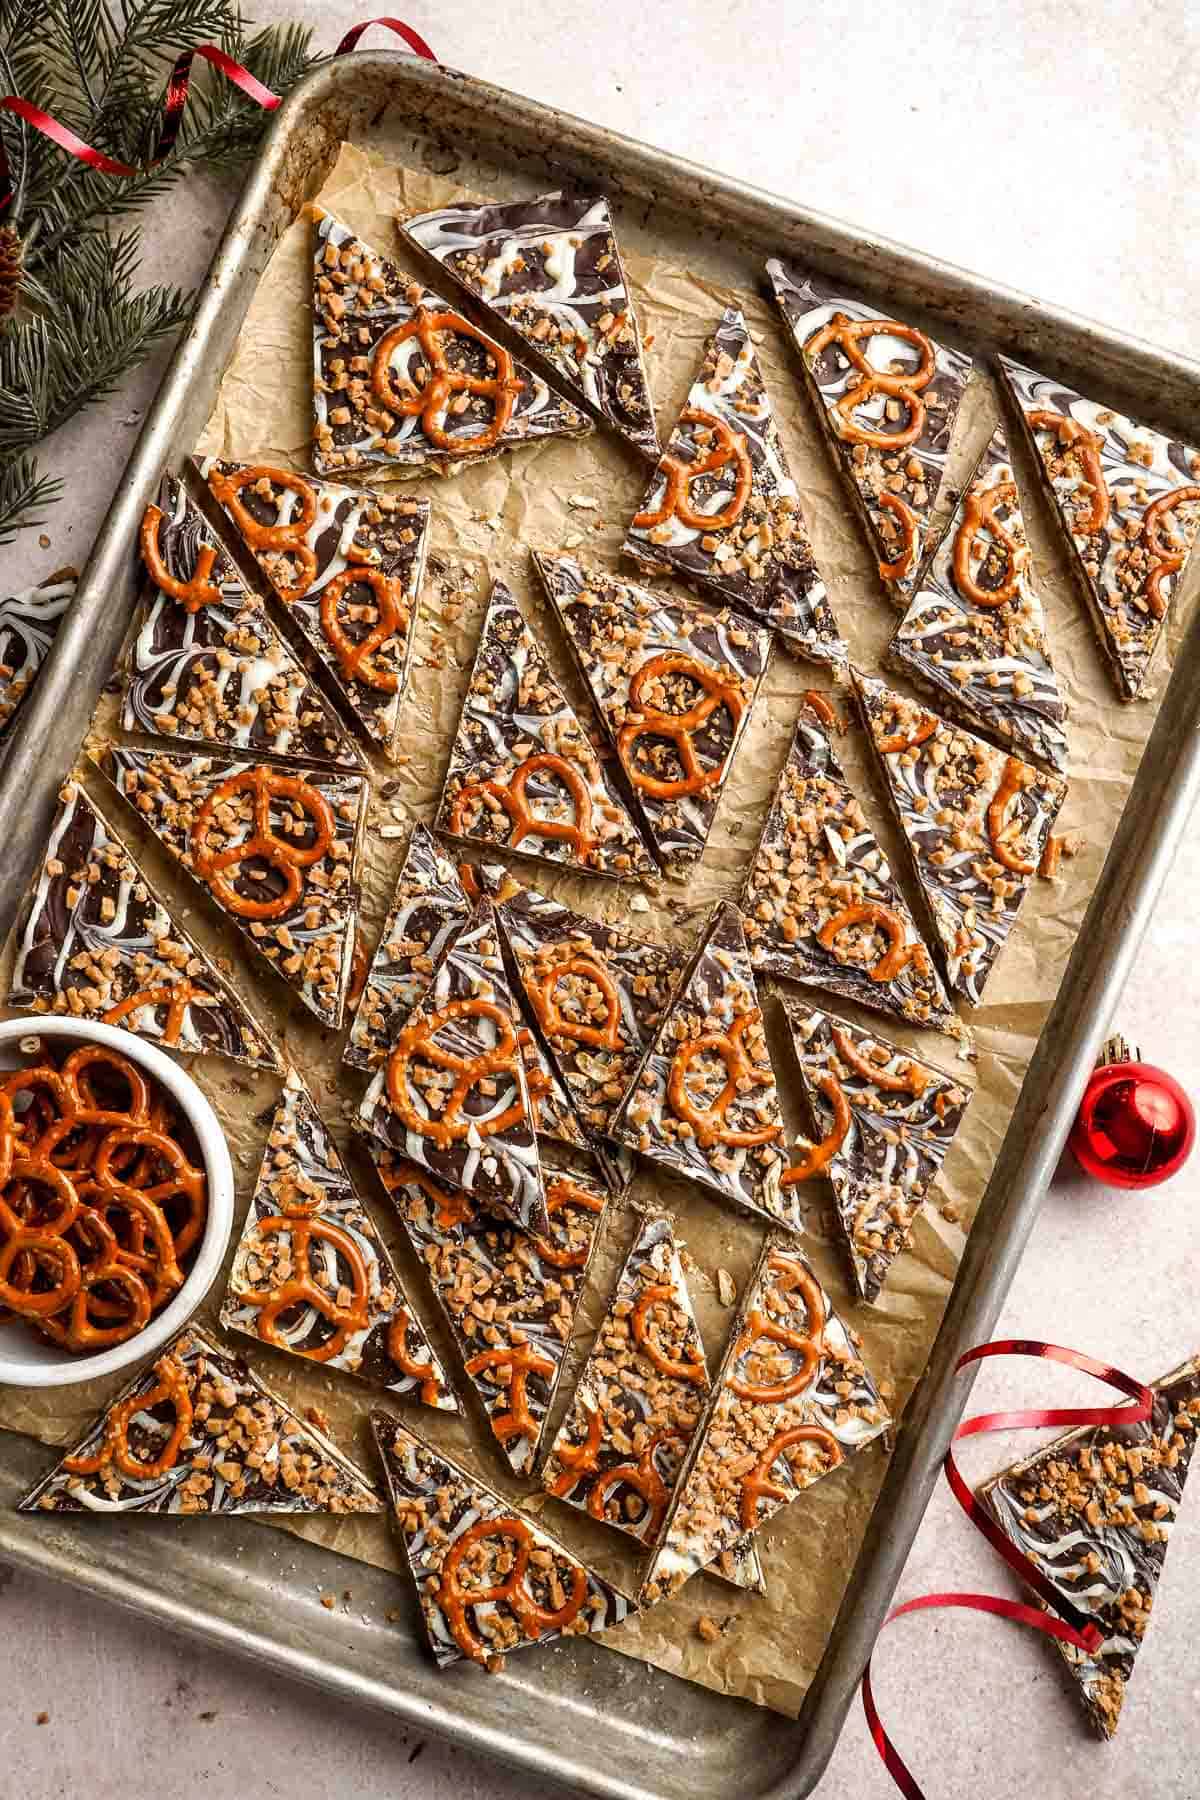 This Christmas Crack Candy is the simplest and most delicious holiday treat you'll make! It's sweet, salty, crunchy, and chocolatey. | aheadofthyme.com